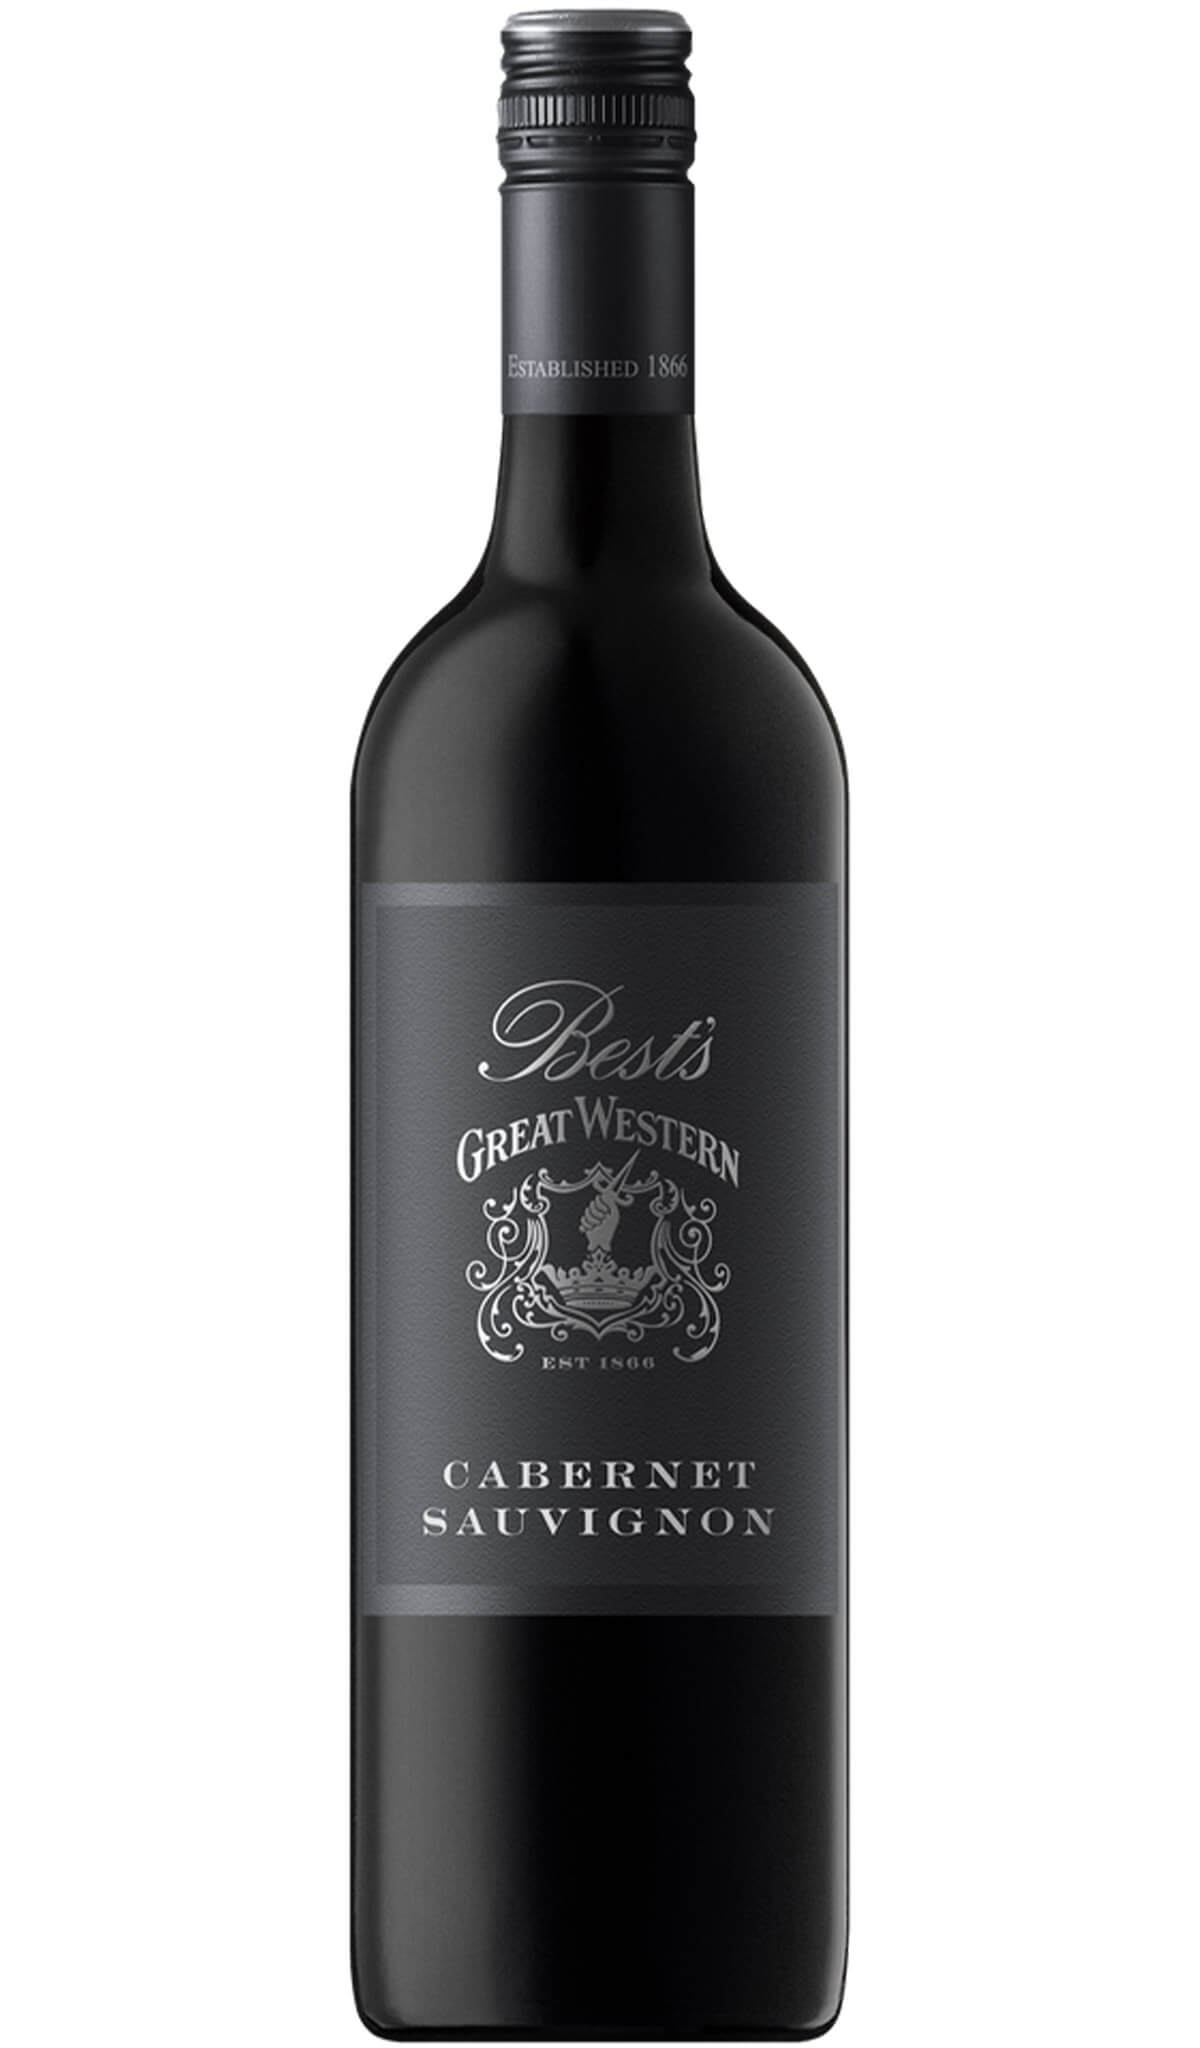 Find out more or buy Best's Great Western Cabernet Sauvignon 2021 online at Wine Sellers Direct - Australia’s independent liquor specialists.